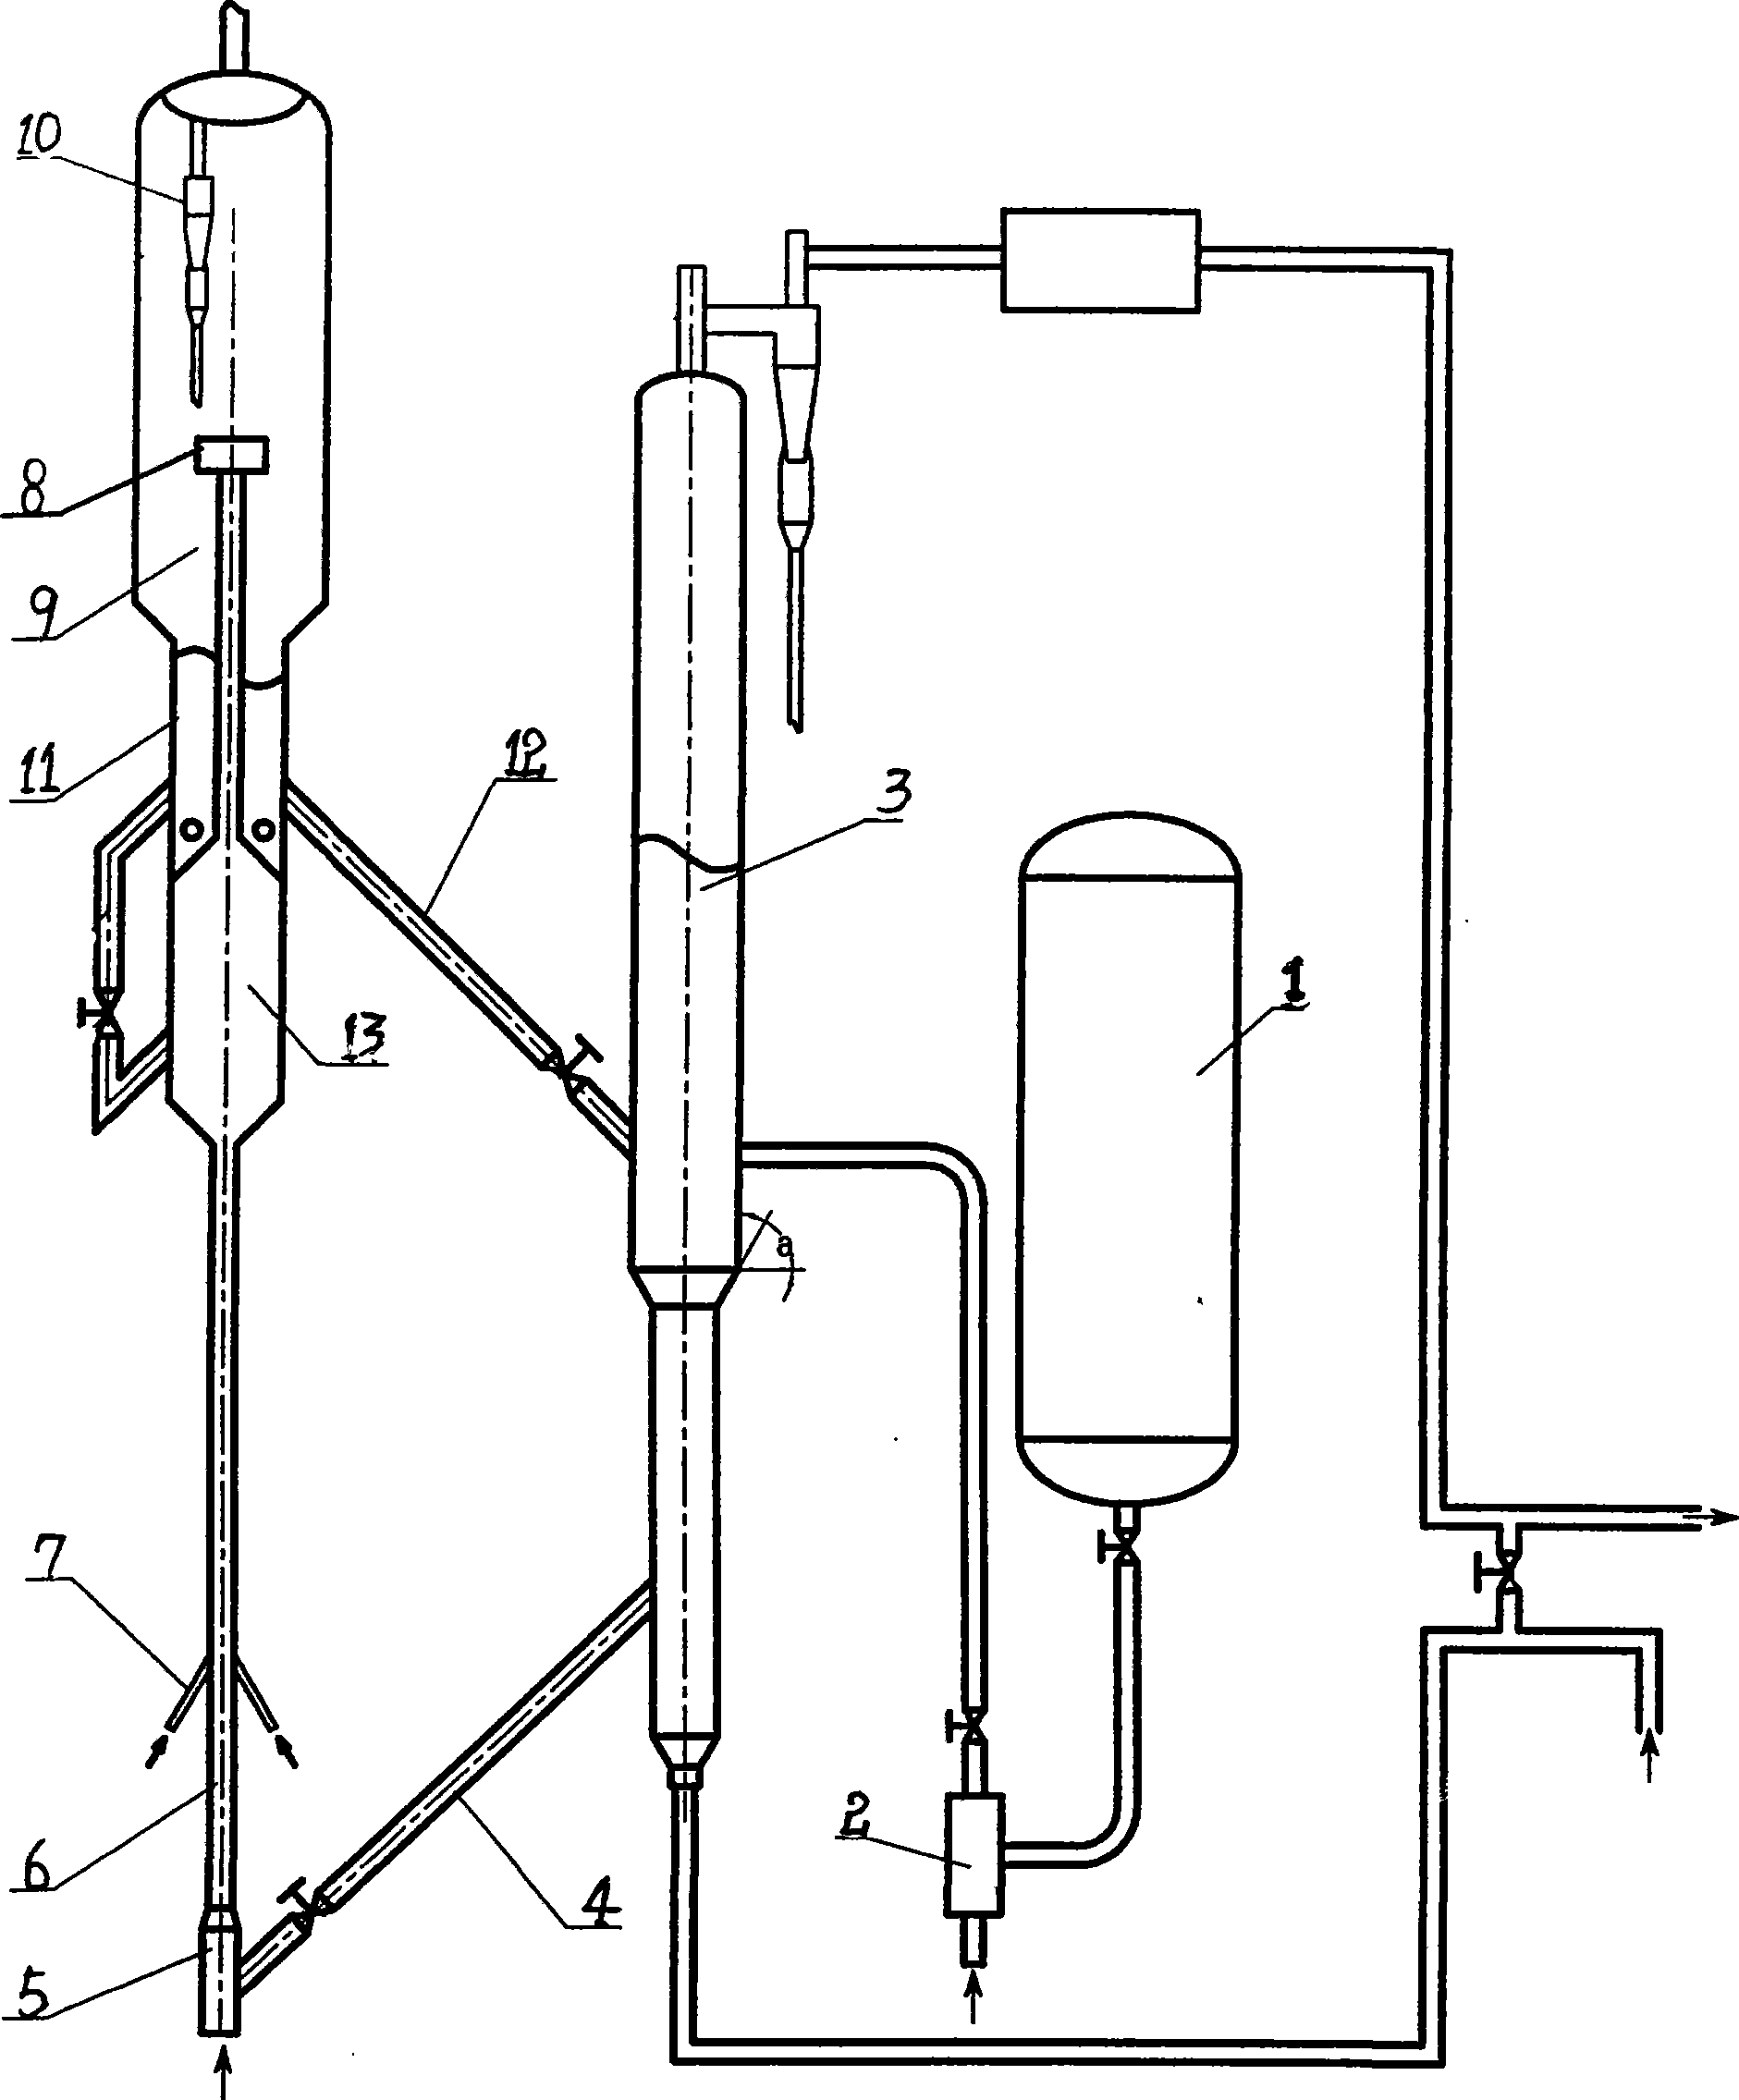 Process for preparing carbon disulphide by using circulating fluid bed